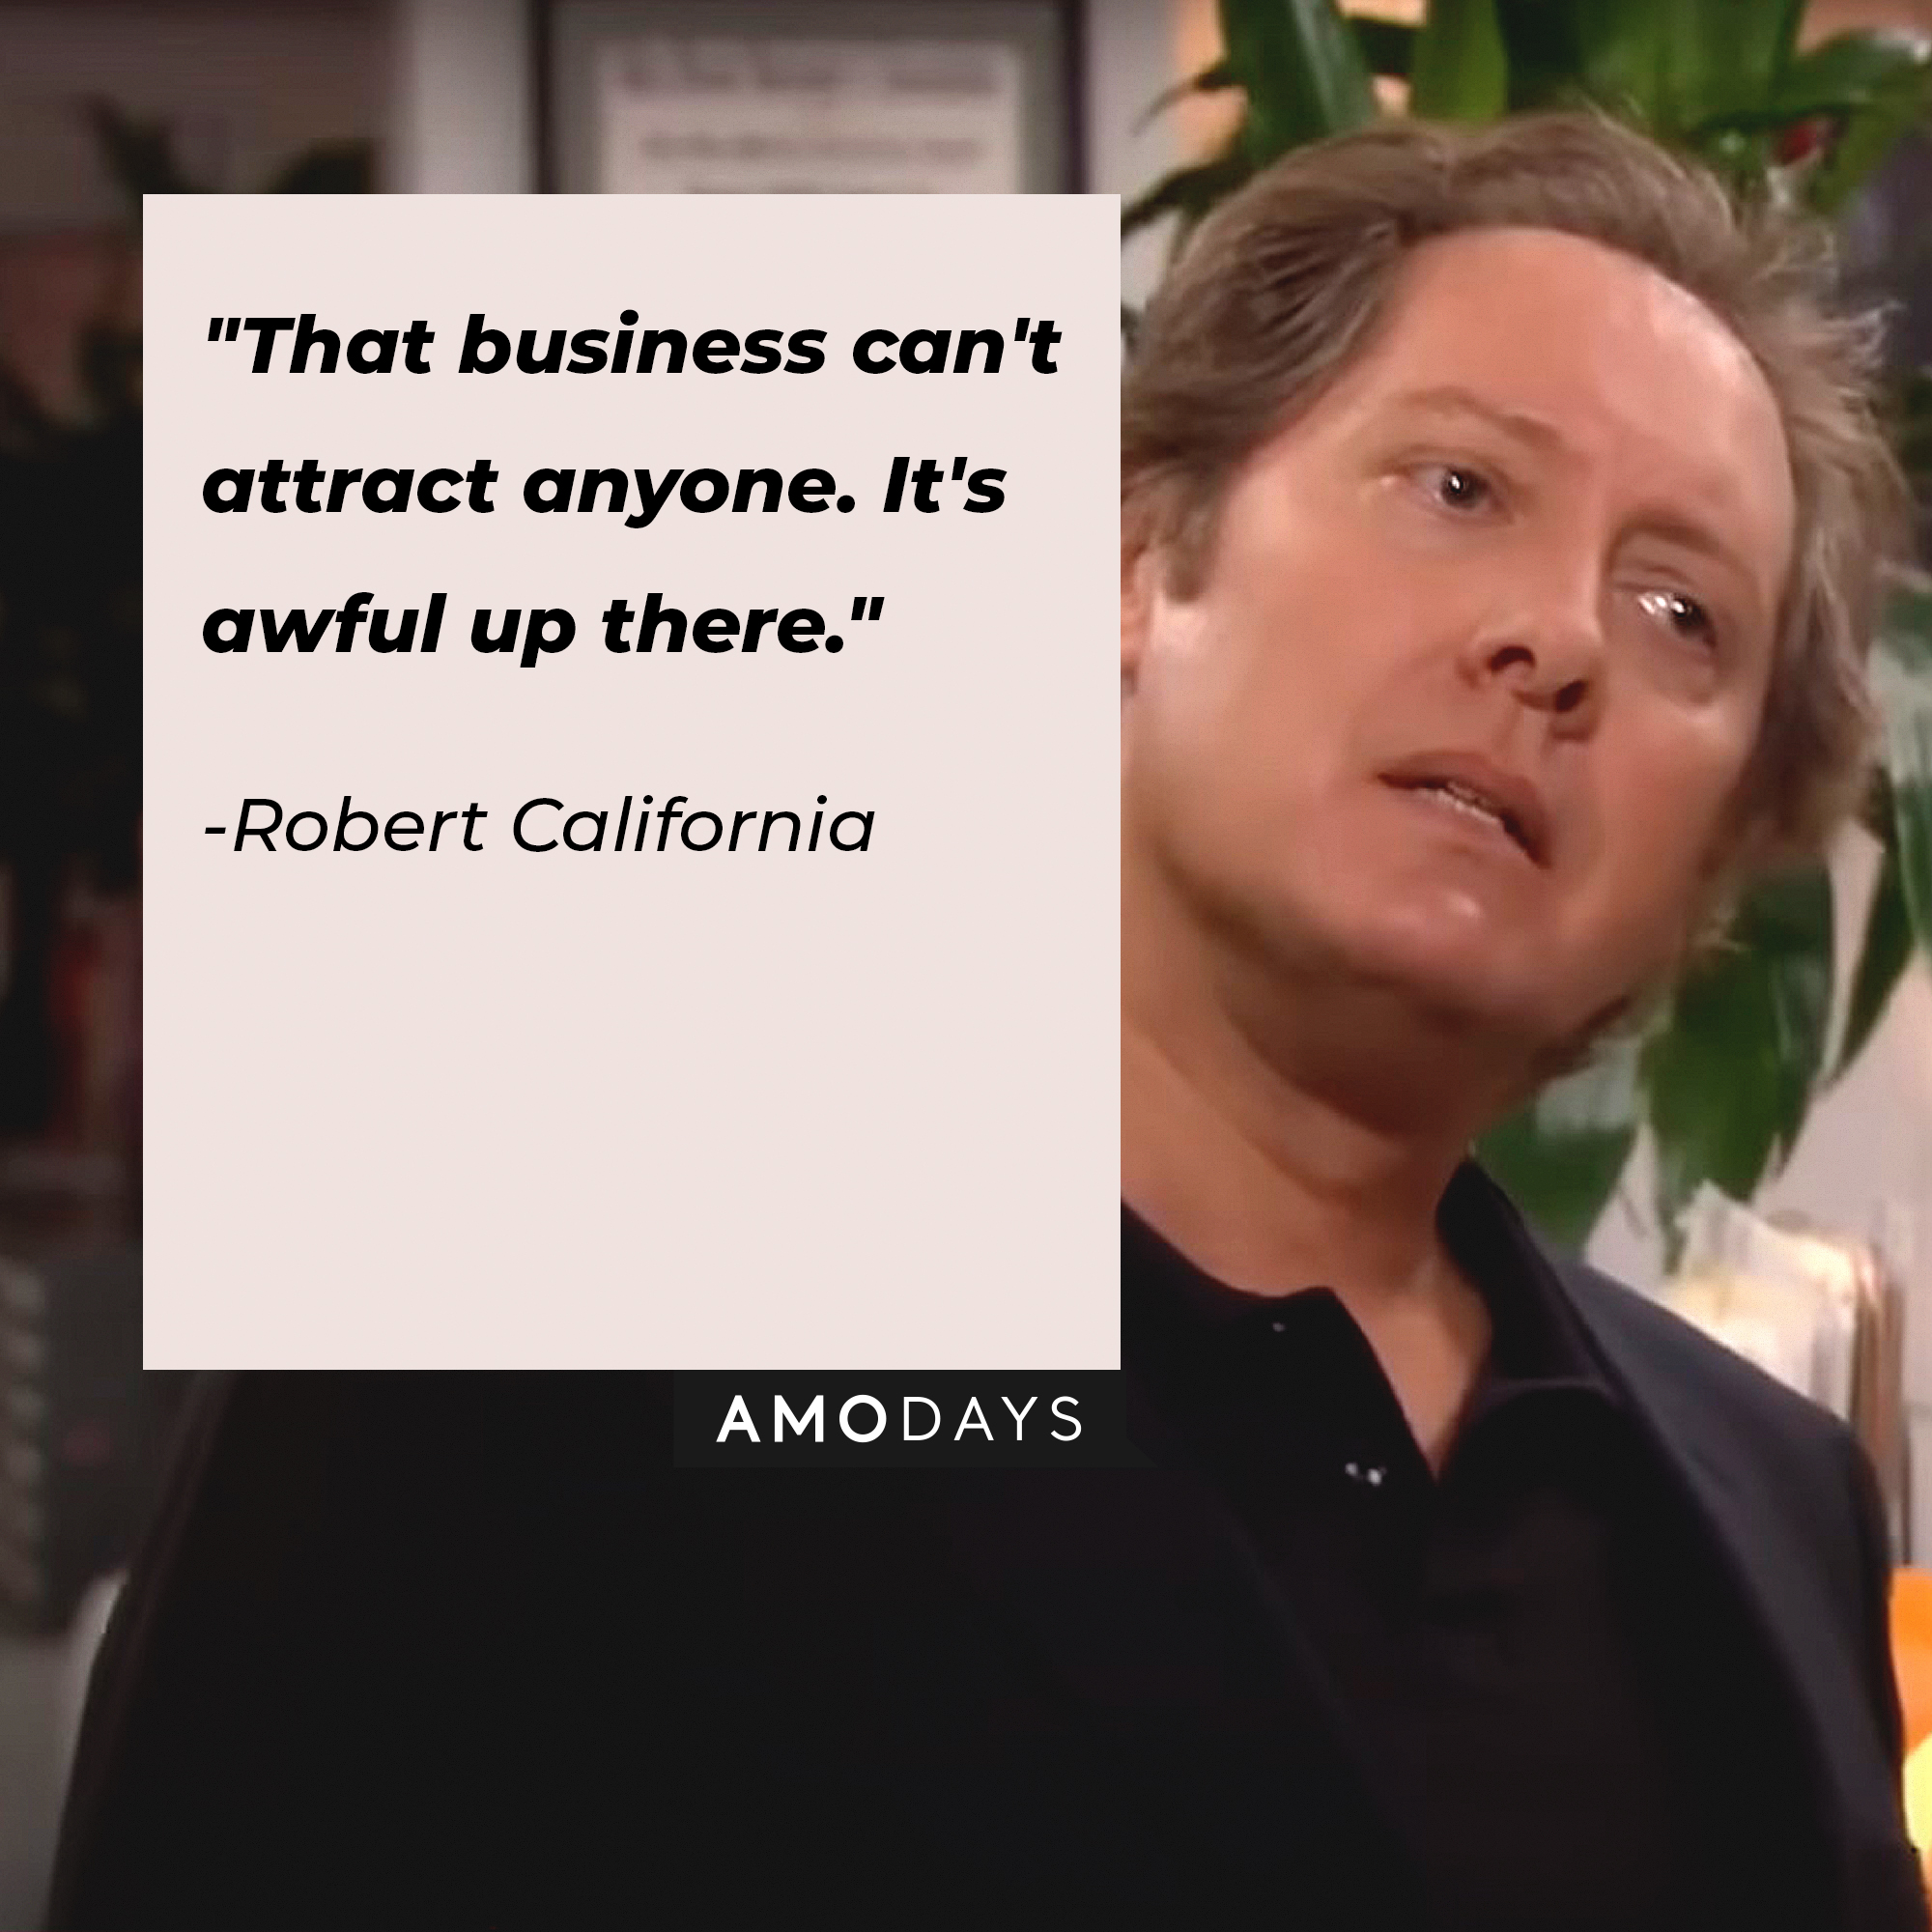 Robert California's quote: "That business can't attract anyone. It's awful up there." | Image: AmoDays